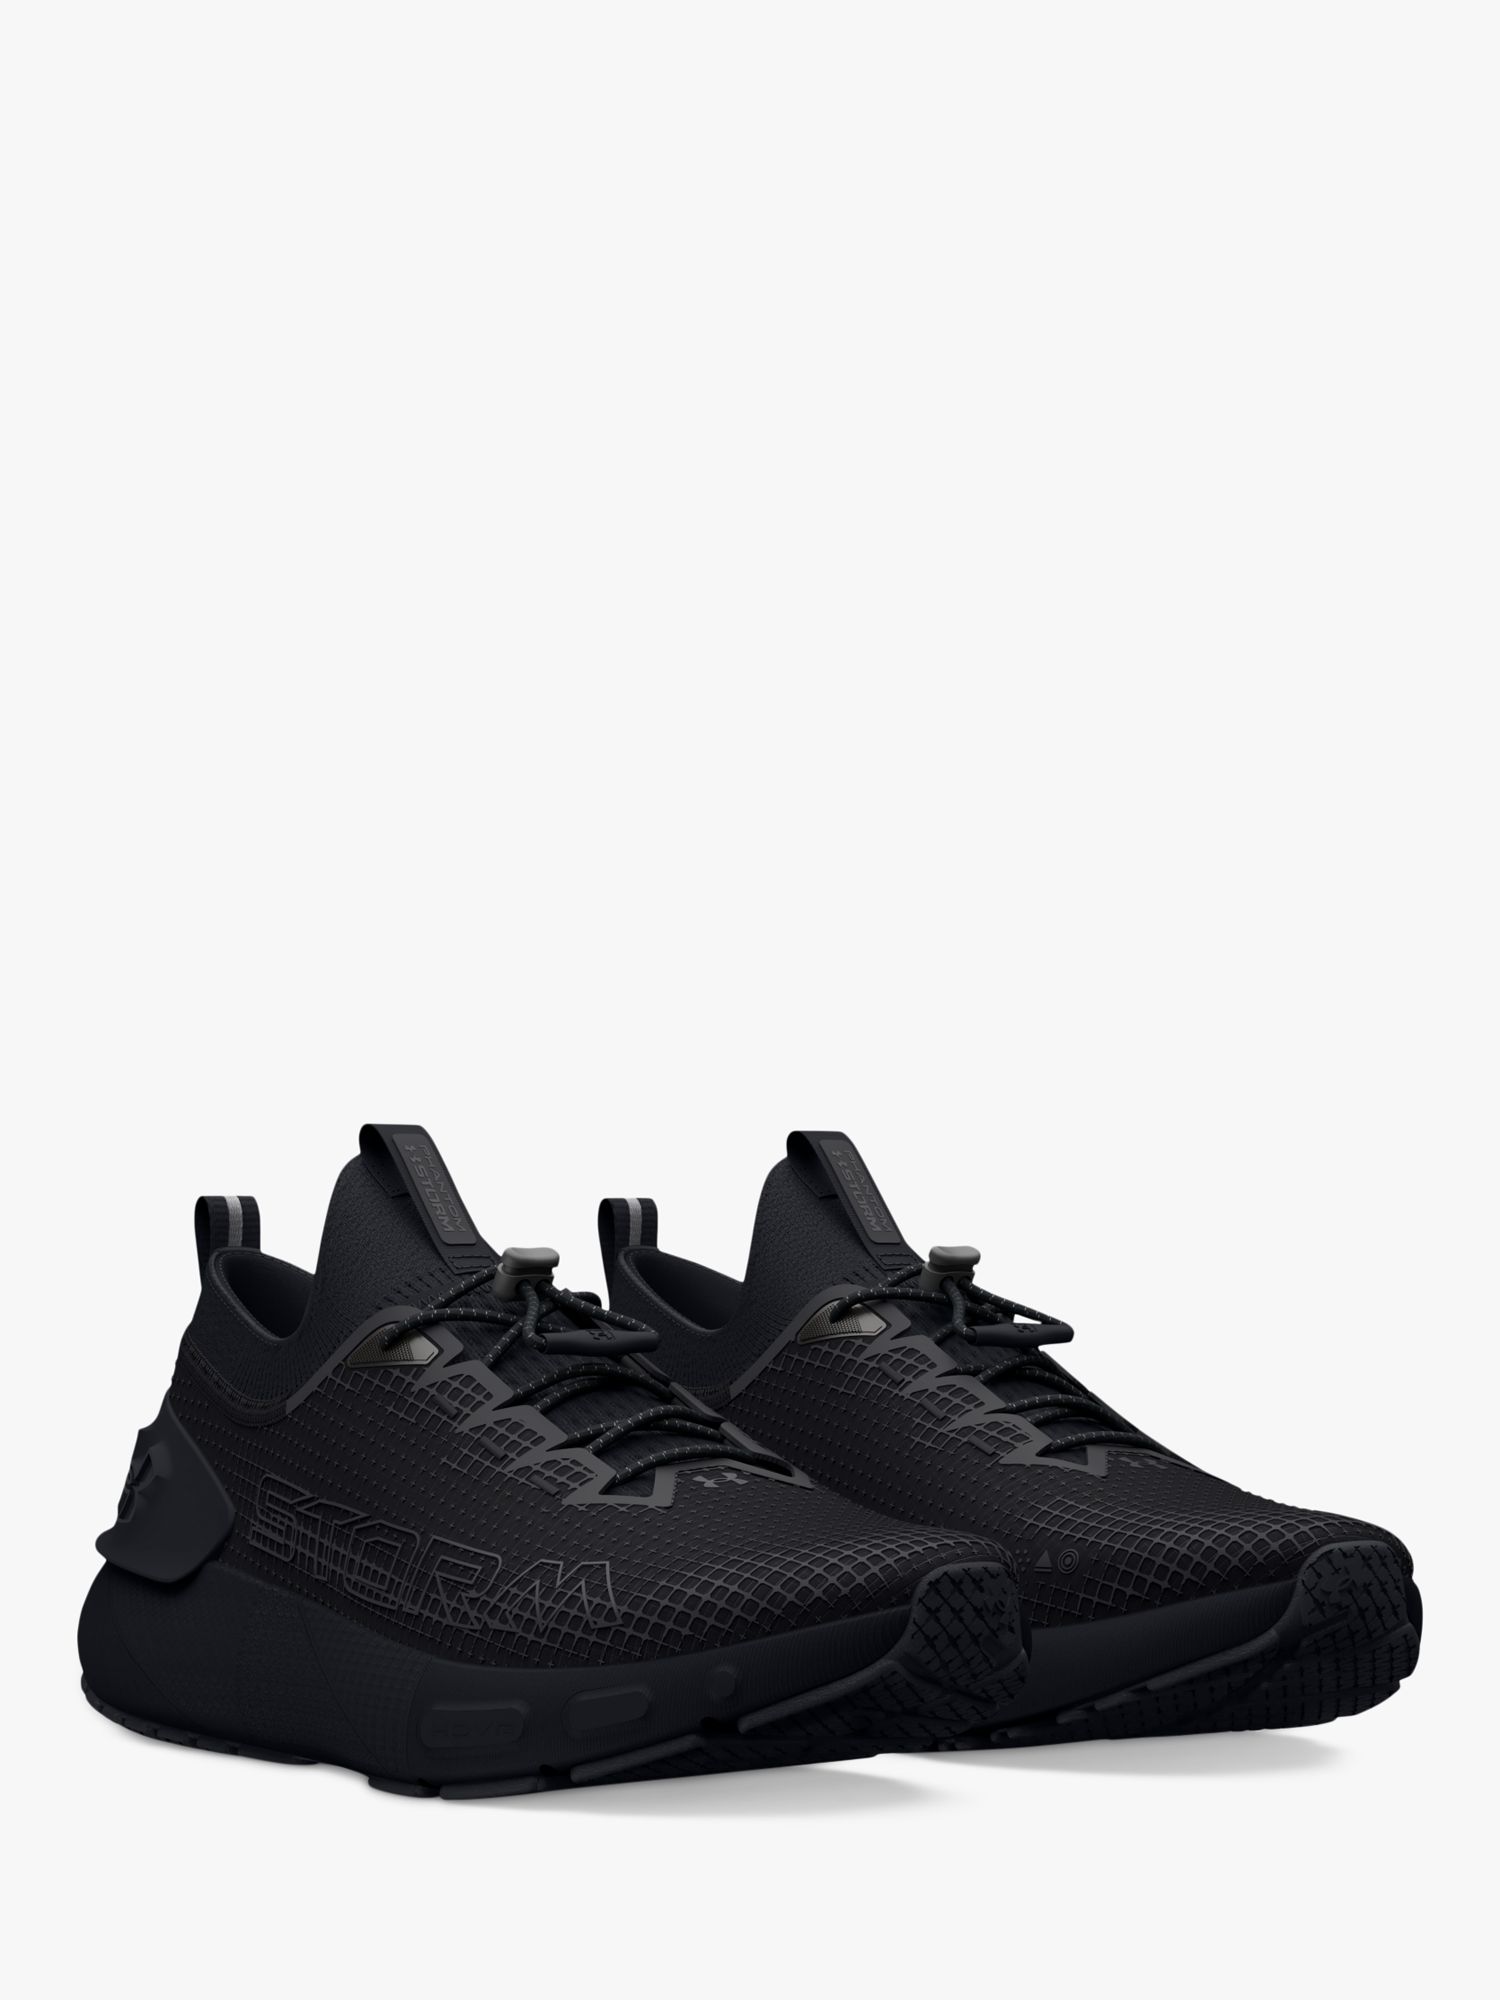 Under Armour HOVR Storm Men's Running Shoes, Black at John Lewis & Partners